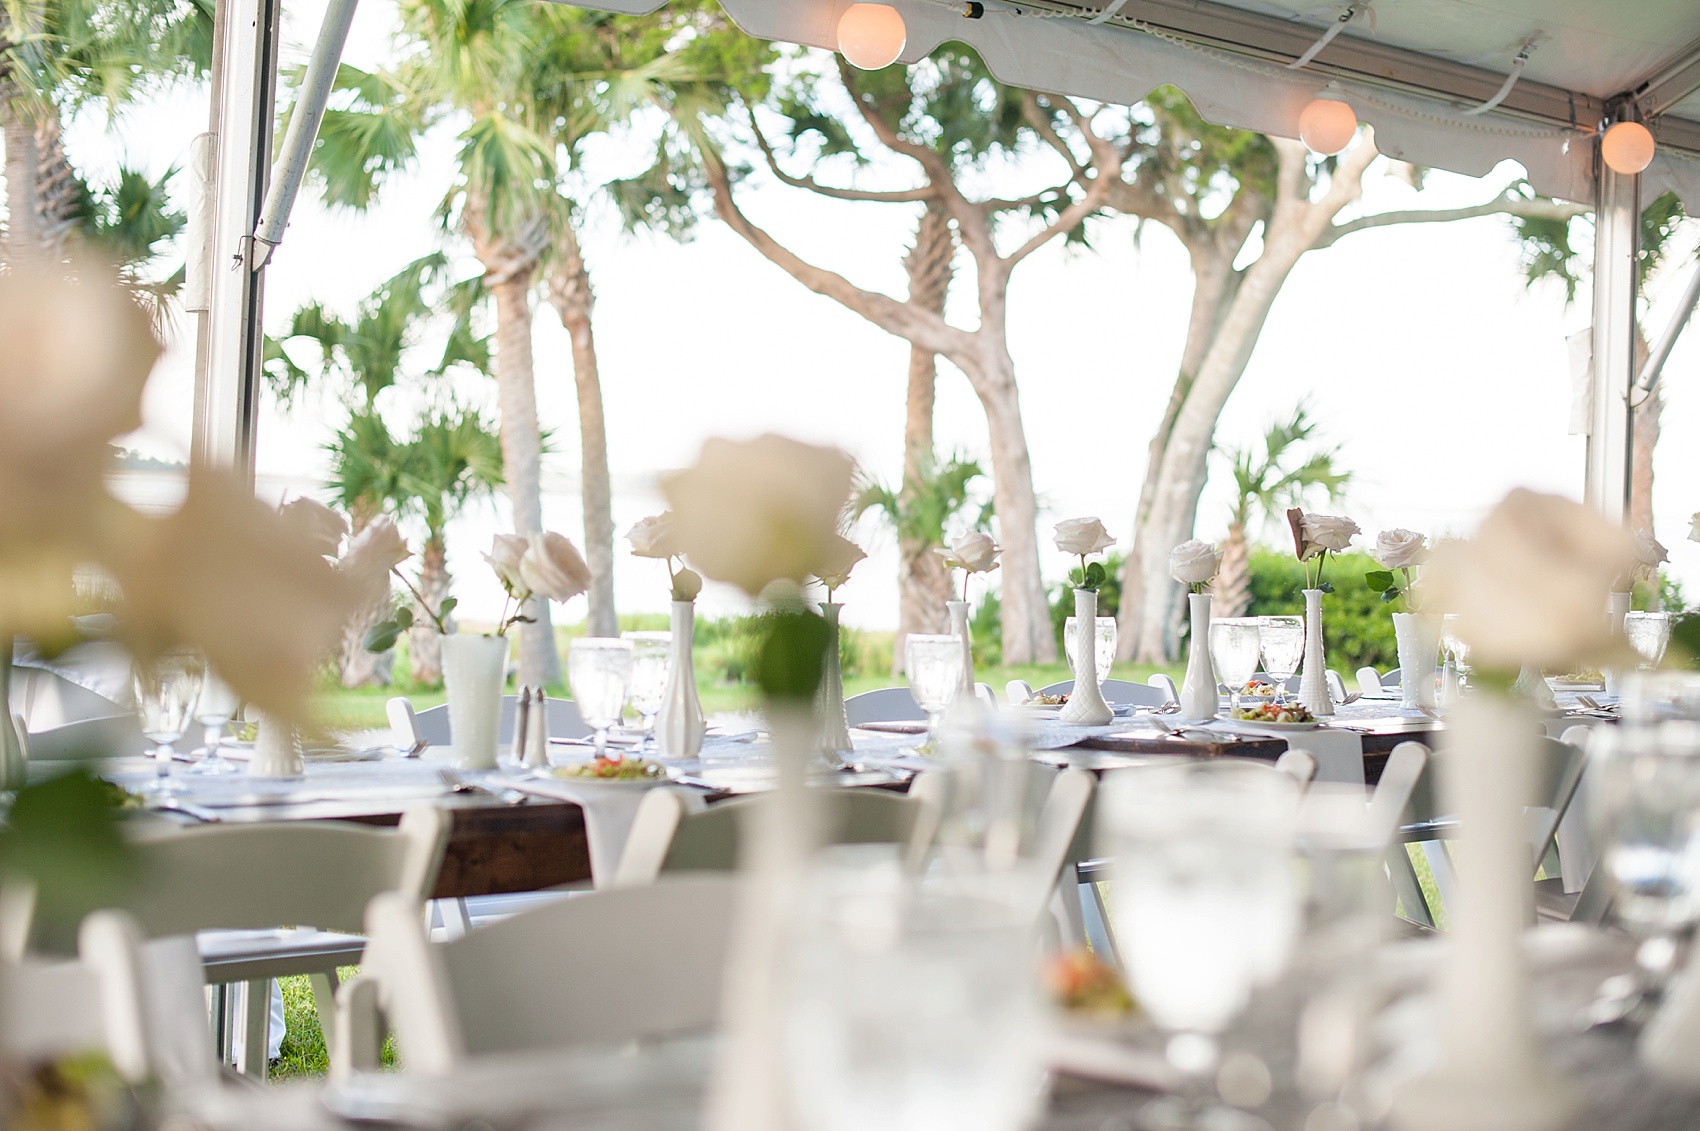 Tented wedding reception for a Haig Point wedding in South Carolina, off the coast of Hilton Head. Farm tables and white roses and vases complete the look. Photos by Mikkel Paige Photography.